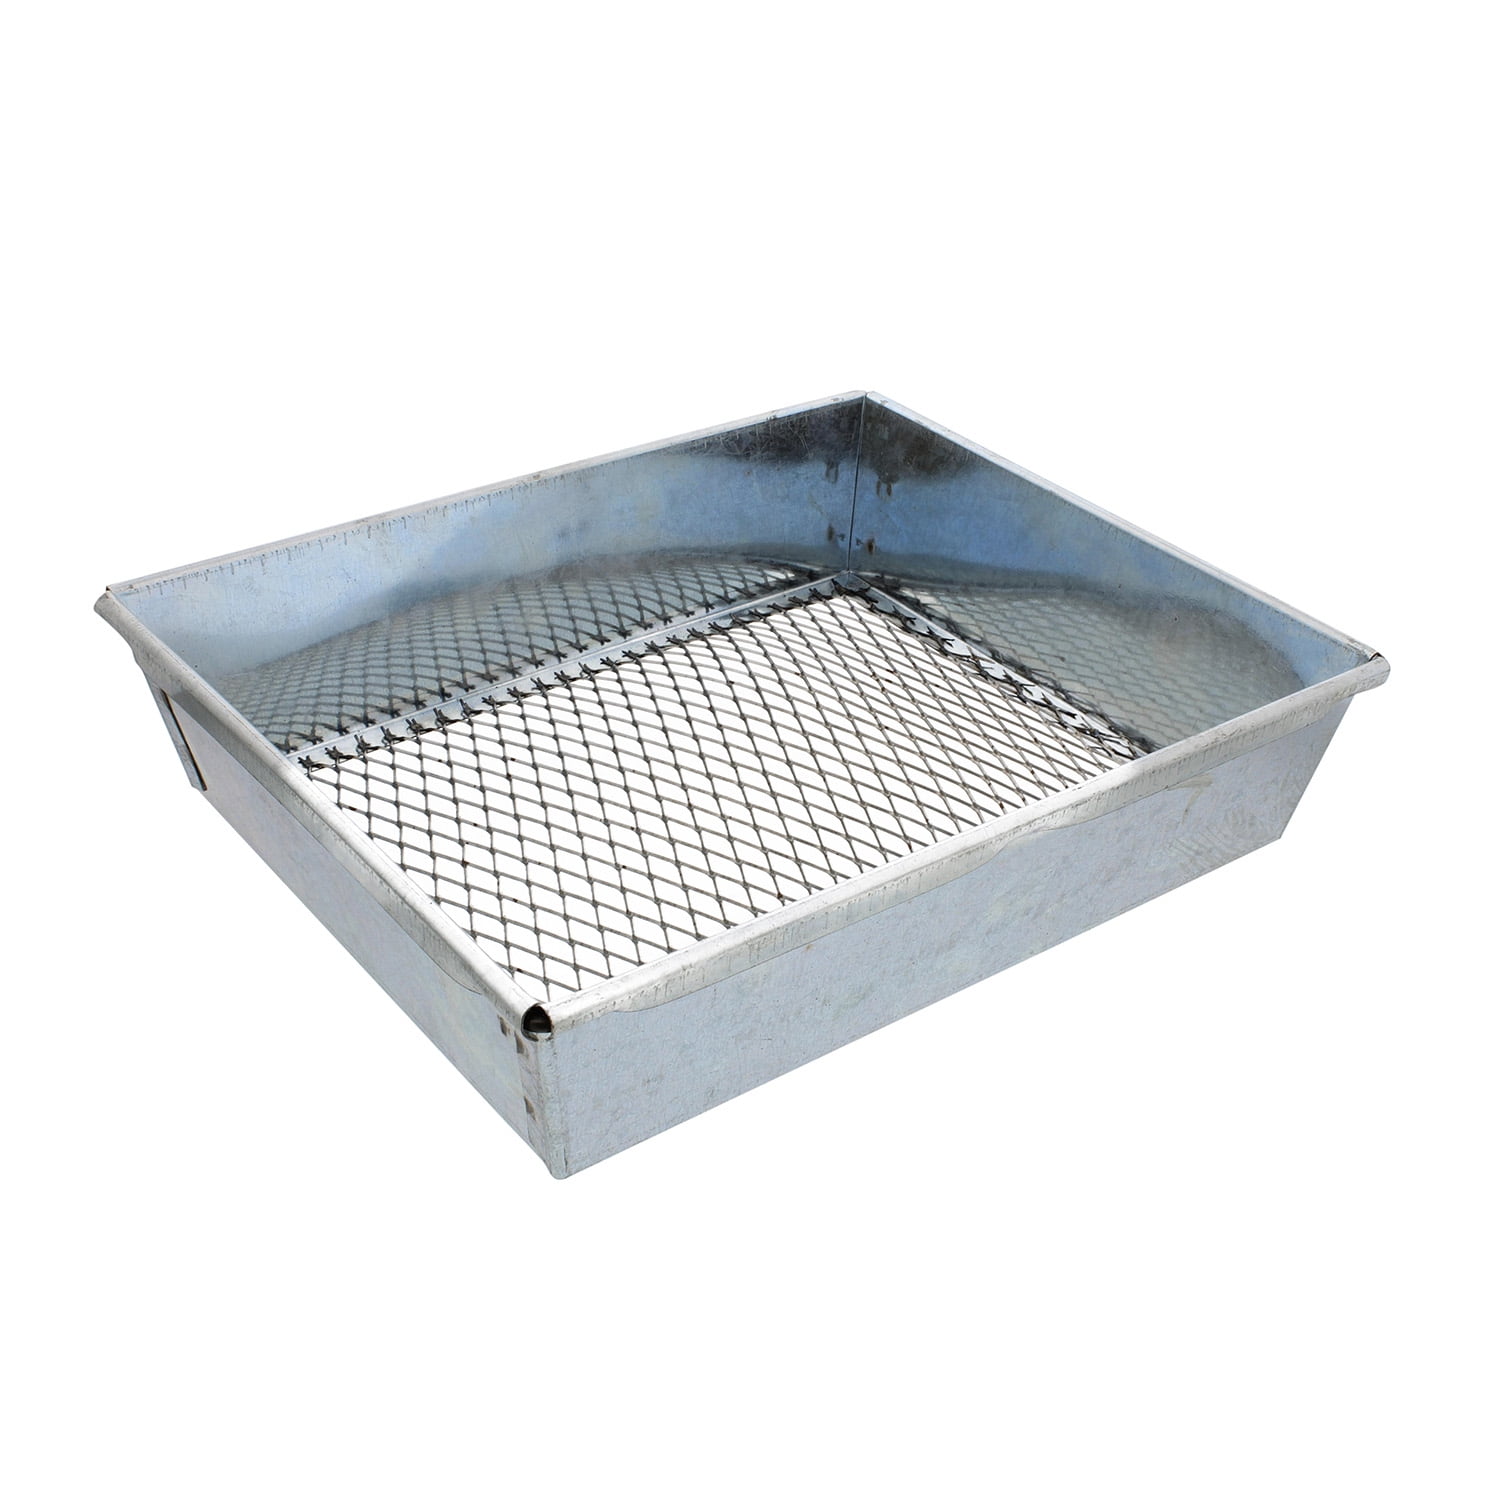 Trapping Sifter – 9 by 7 Inch Metal Dirt Sifter for Trapping and ...